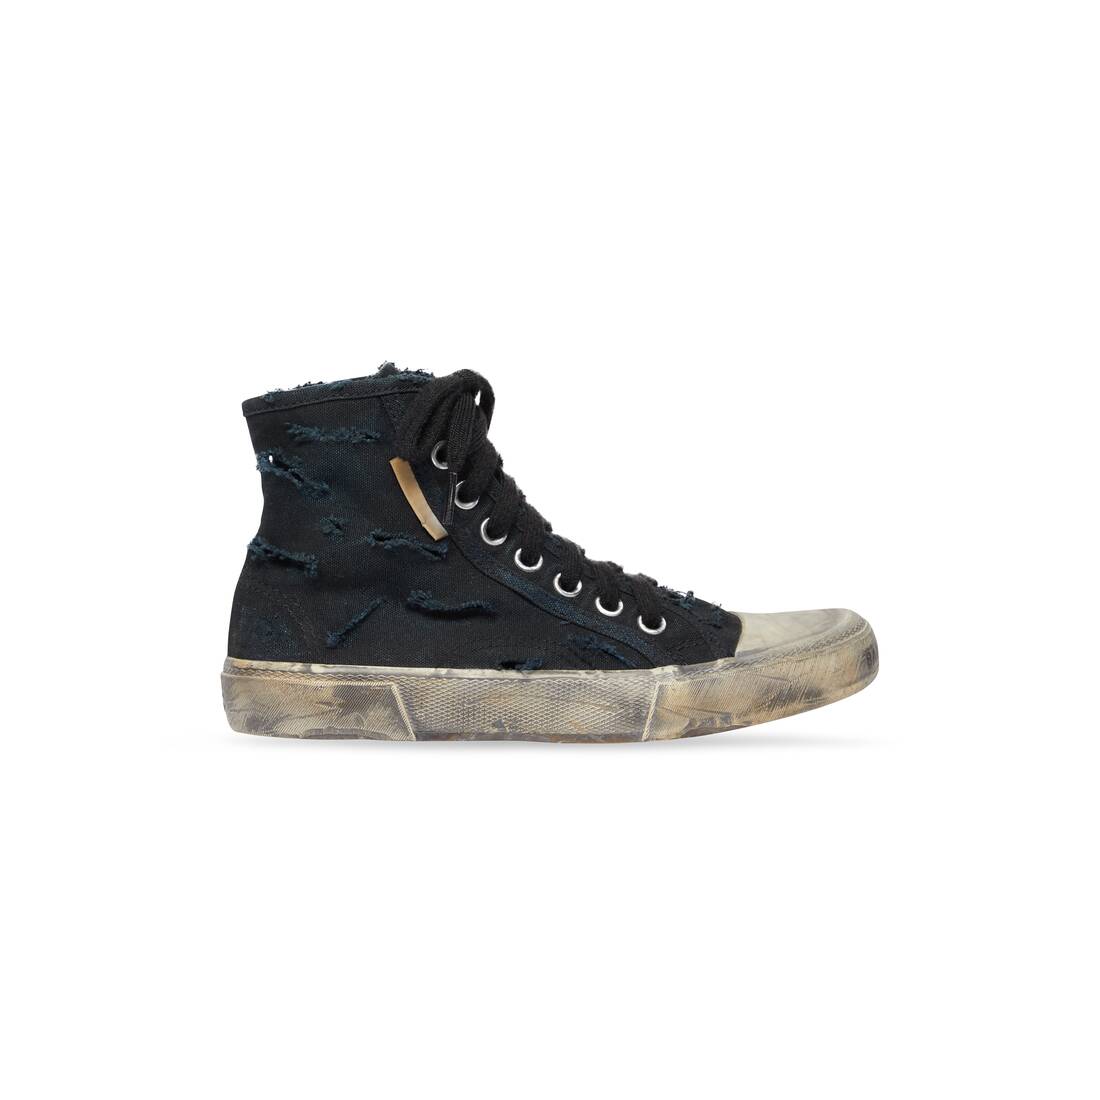 Paris High Top Sneaker in black full destroyed cotton and rubber 